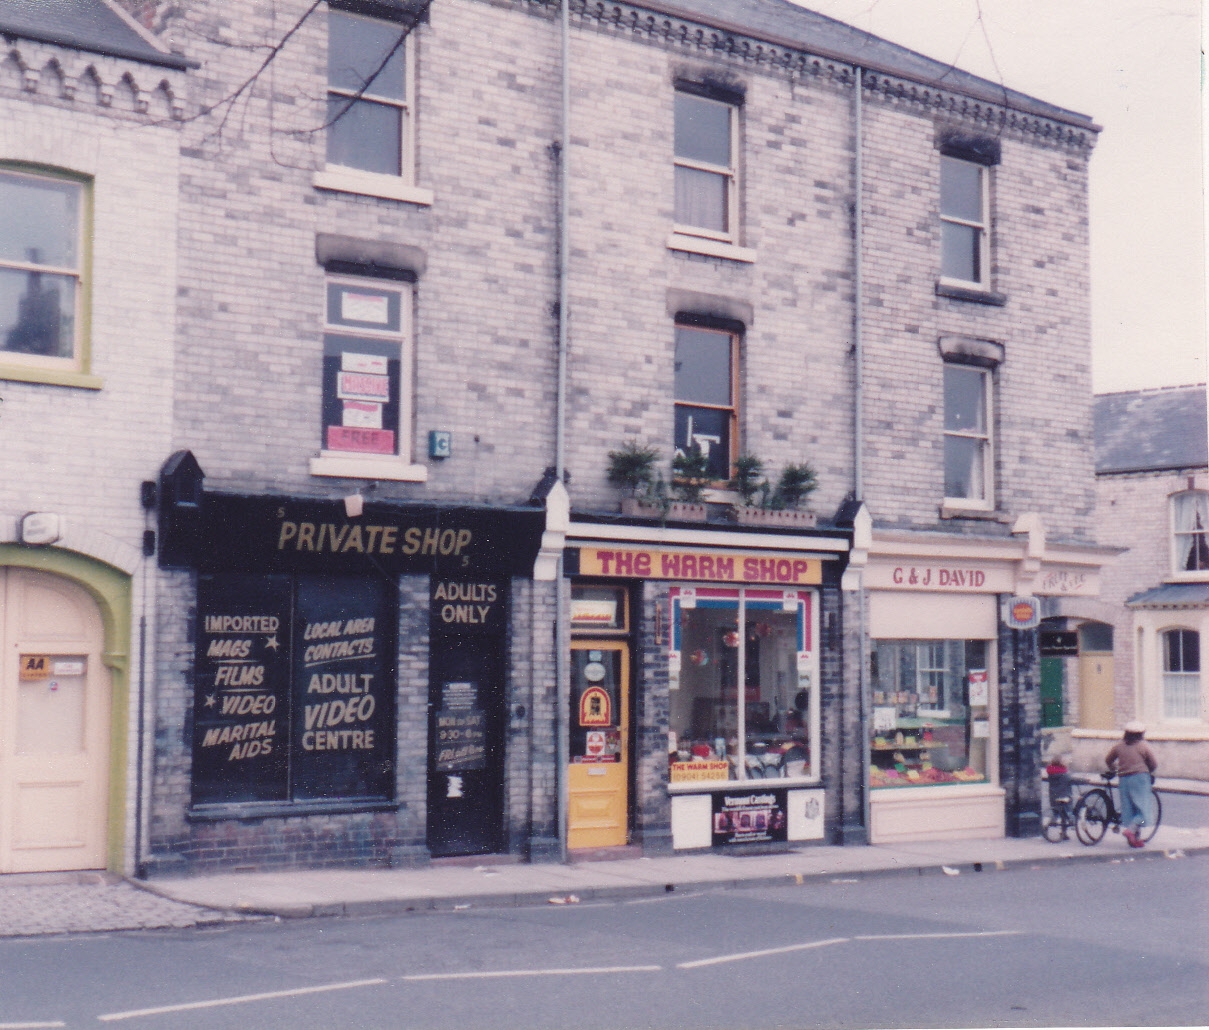 Scarcroft Road shops in 1984, where the Private shop later became the Hospice charity shop.